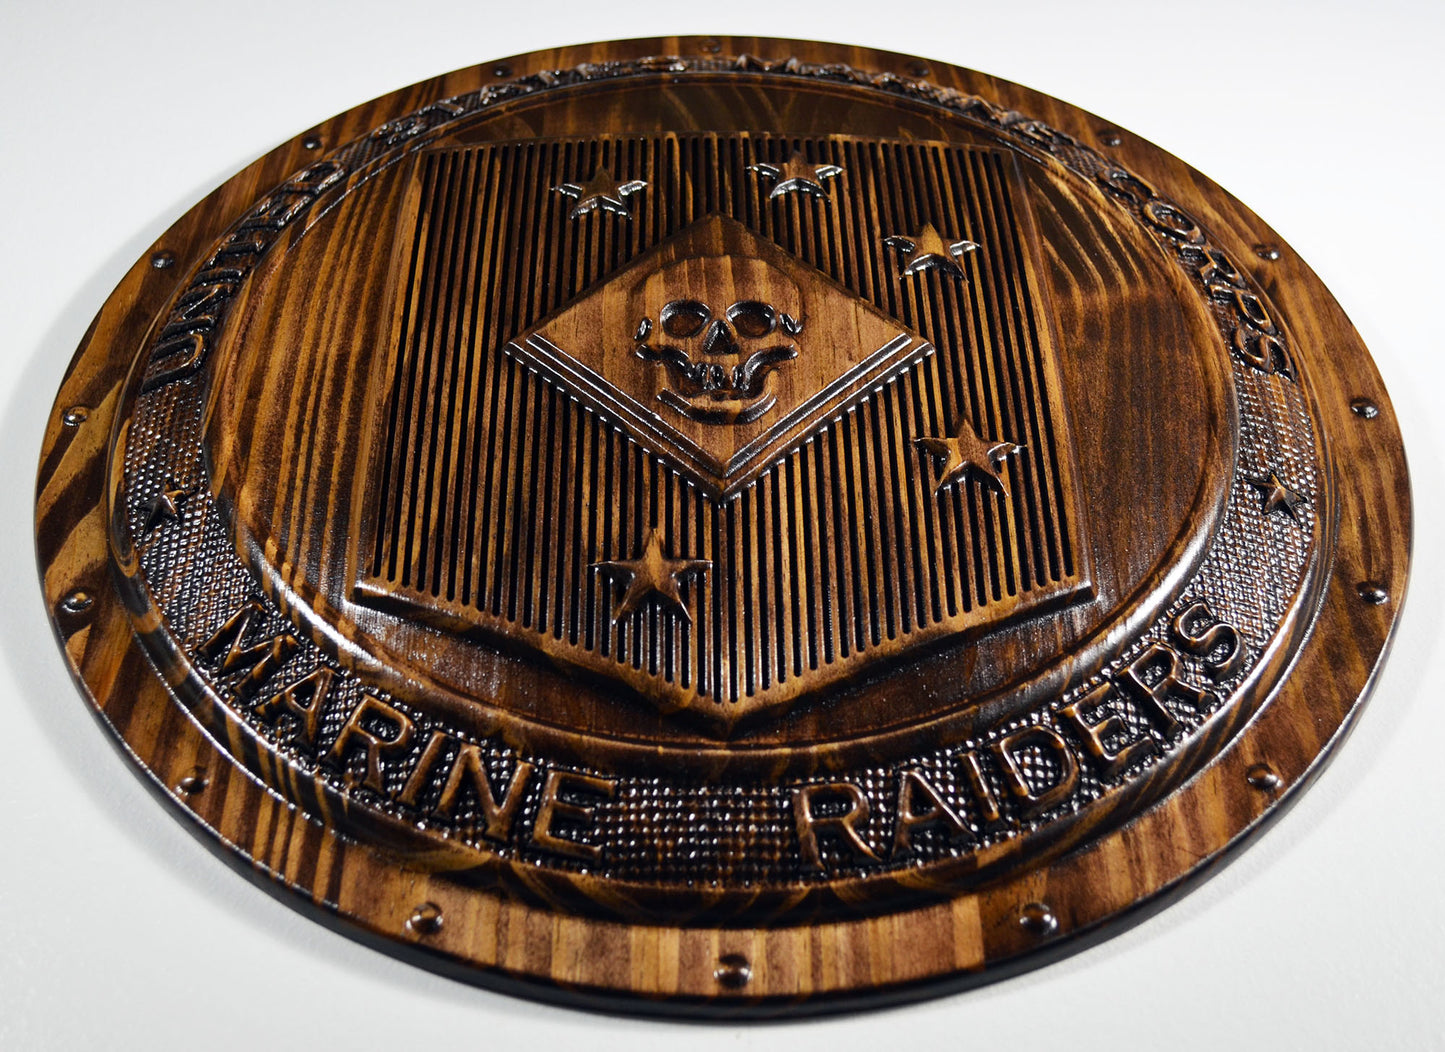 USMC Marine Raiders Shield, stained 3d wood carving, military plaque